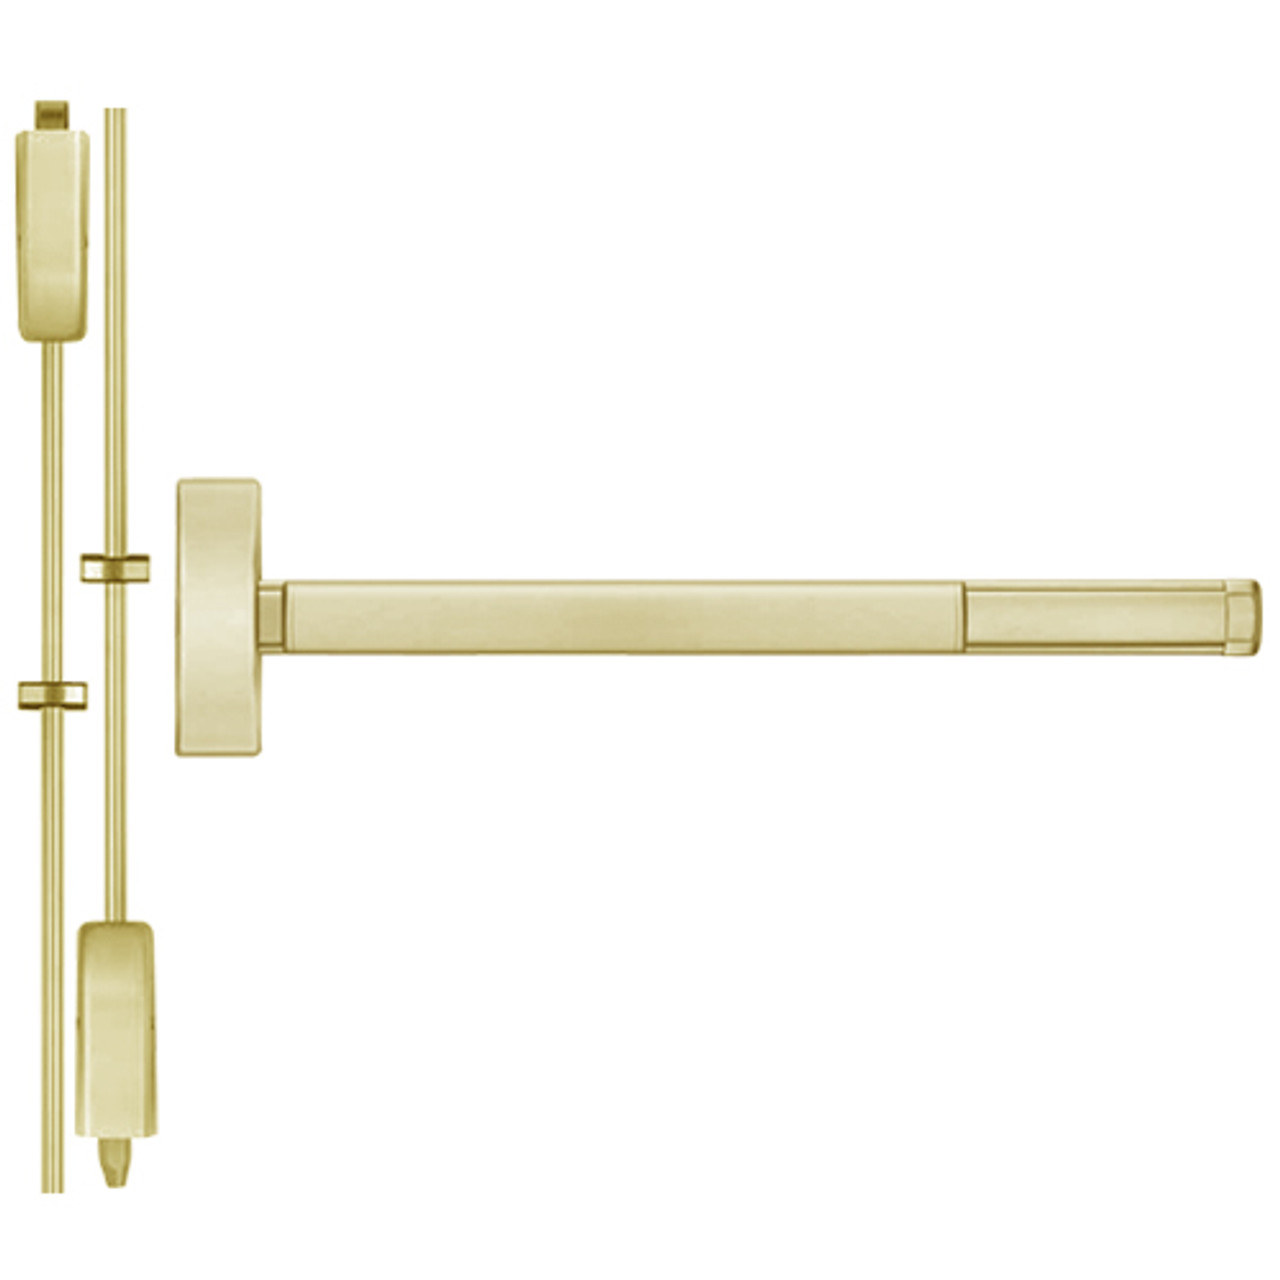 ELR2205LBR-606-36 PHI 2200 Series Non Fire Rated Apex Surface Vertical Rod Device with Electric Latch Retraction Prepped for Key Controls Thumb Piece in Satin Brass Finish